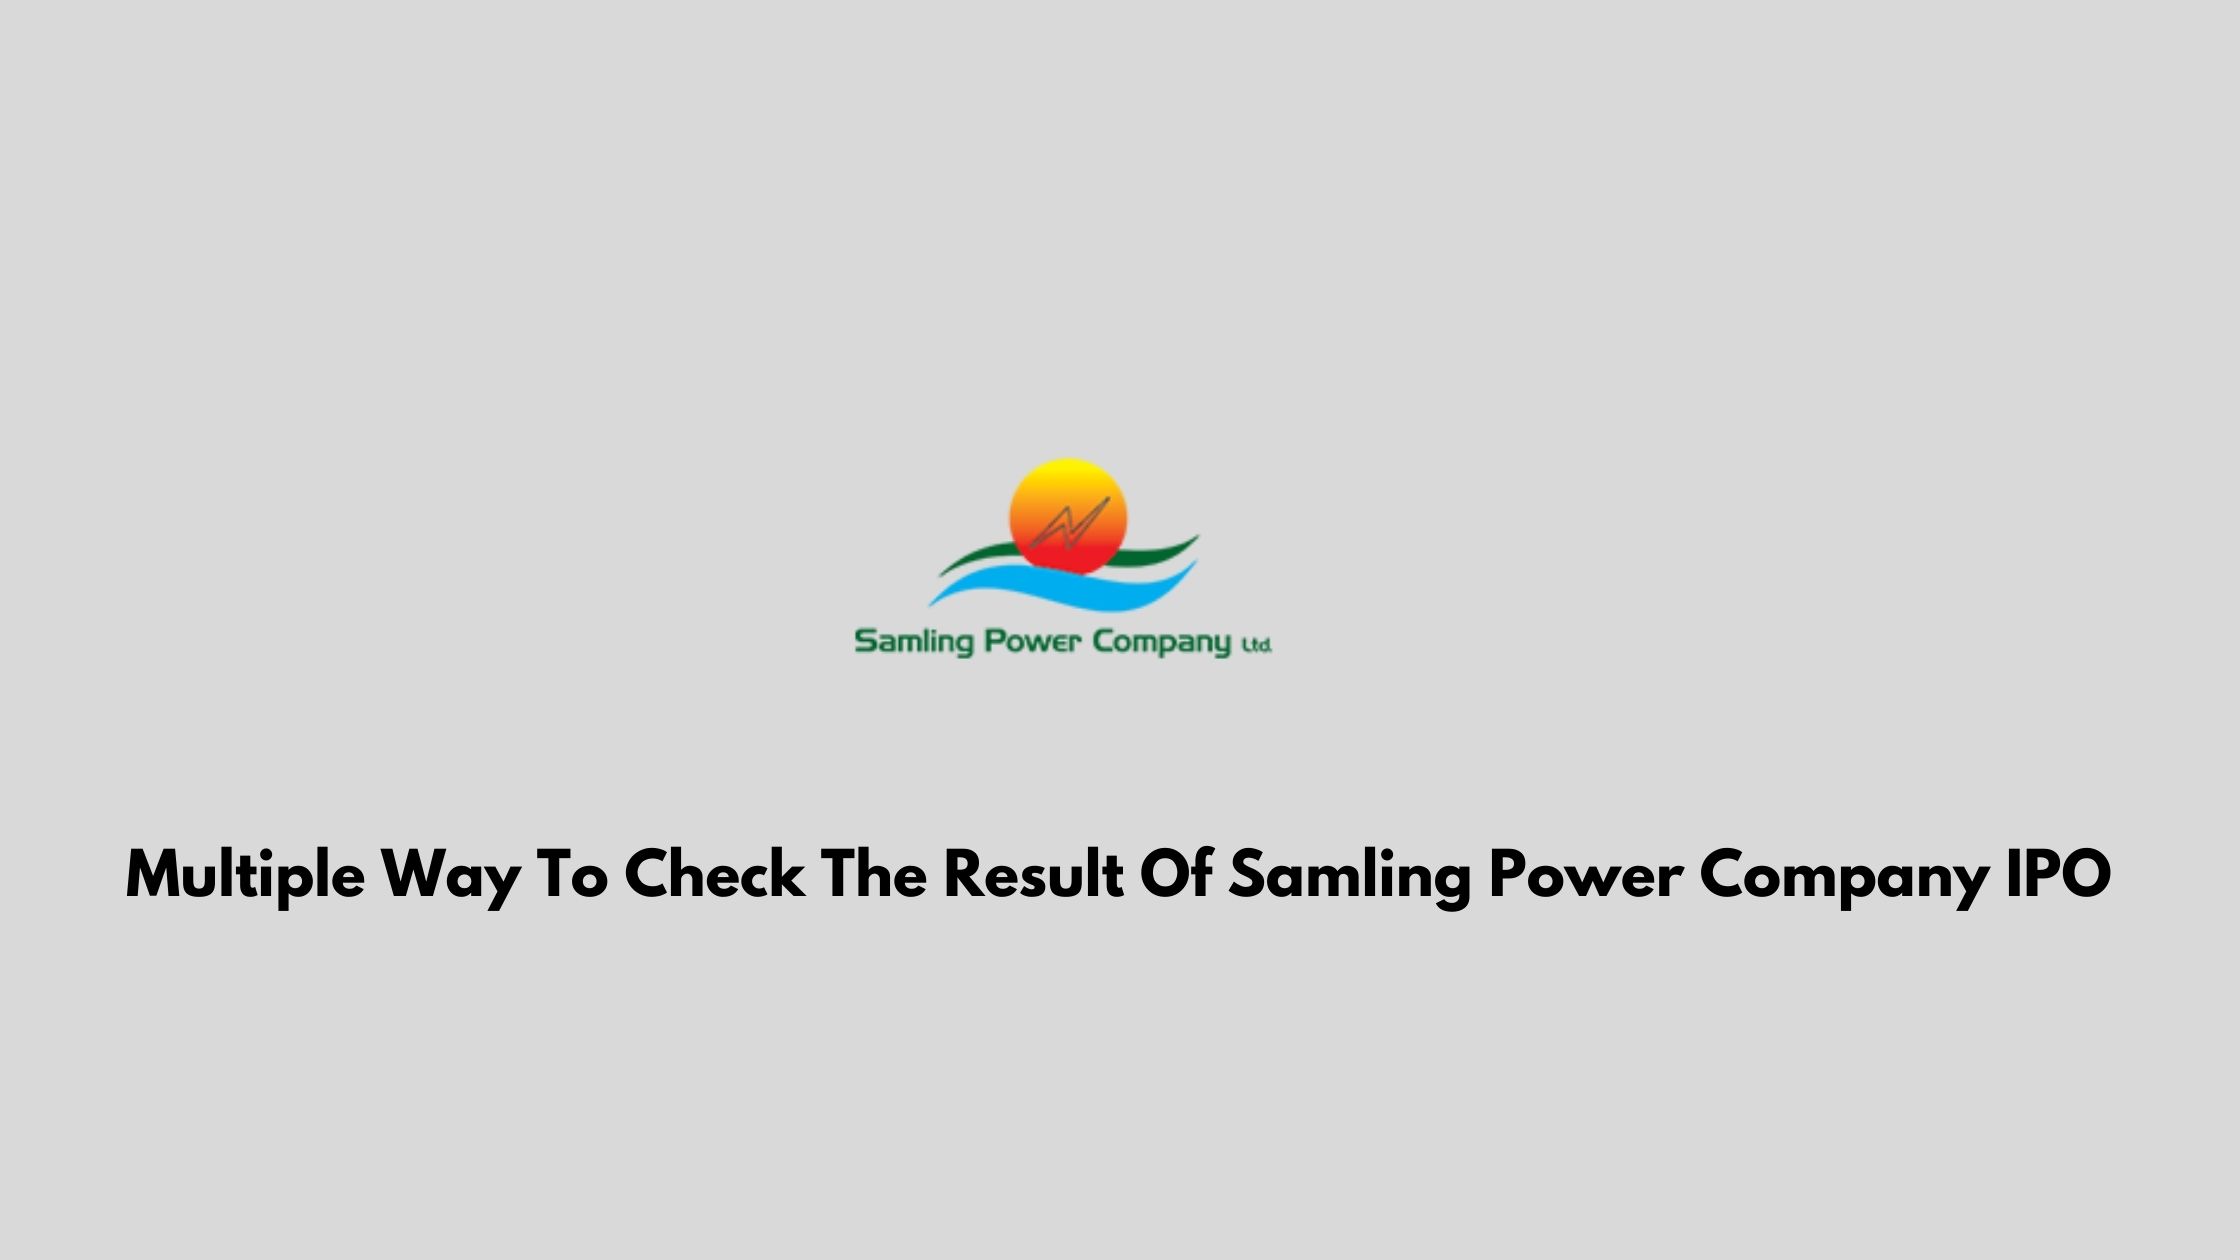 Multiple Way To Check The Result Of Samling Power Company IPO